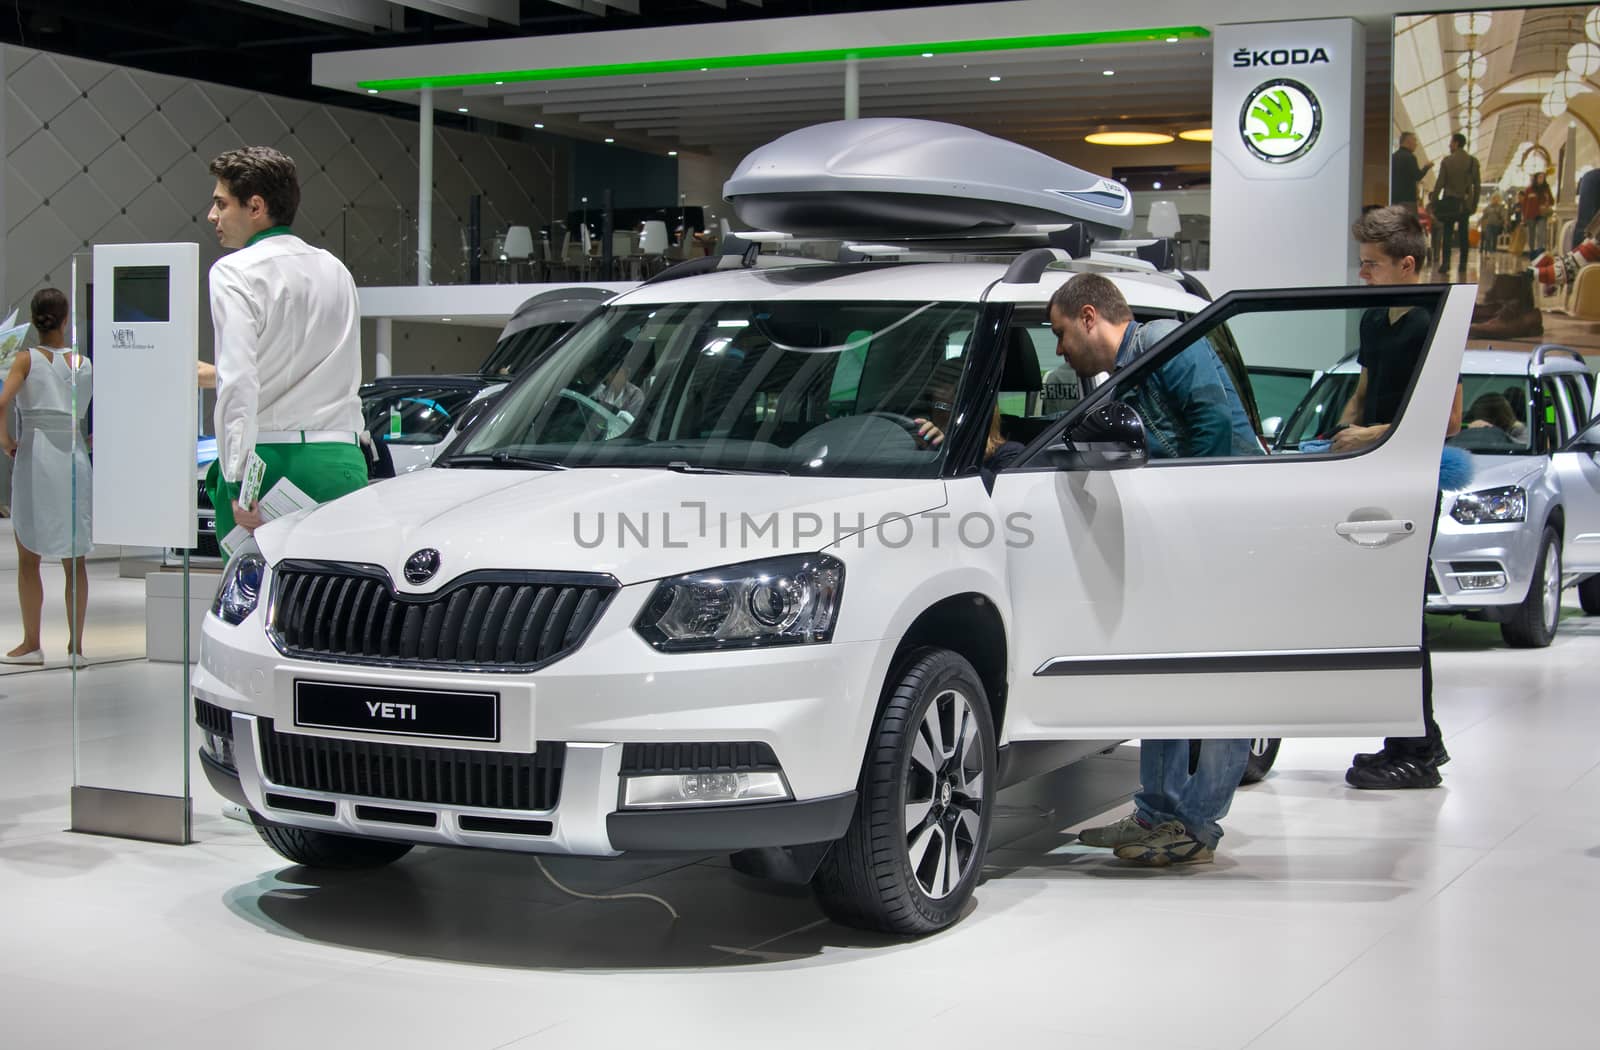 MOSCOW-SEPTEMBER 2: Skoda Yeti at the Moscow International Automobile Salon on September 2, 2014 in Moscow, Russia